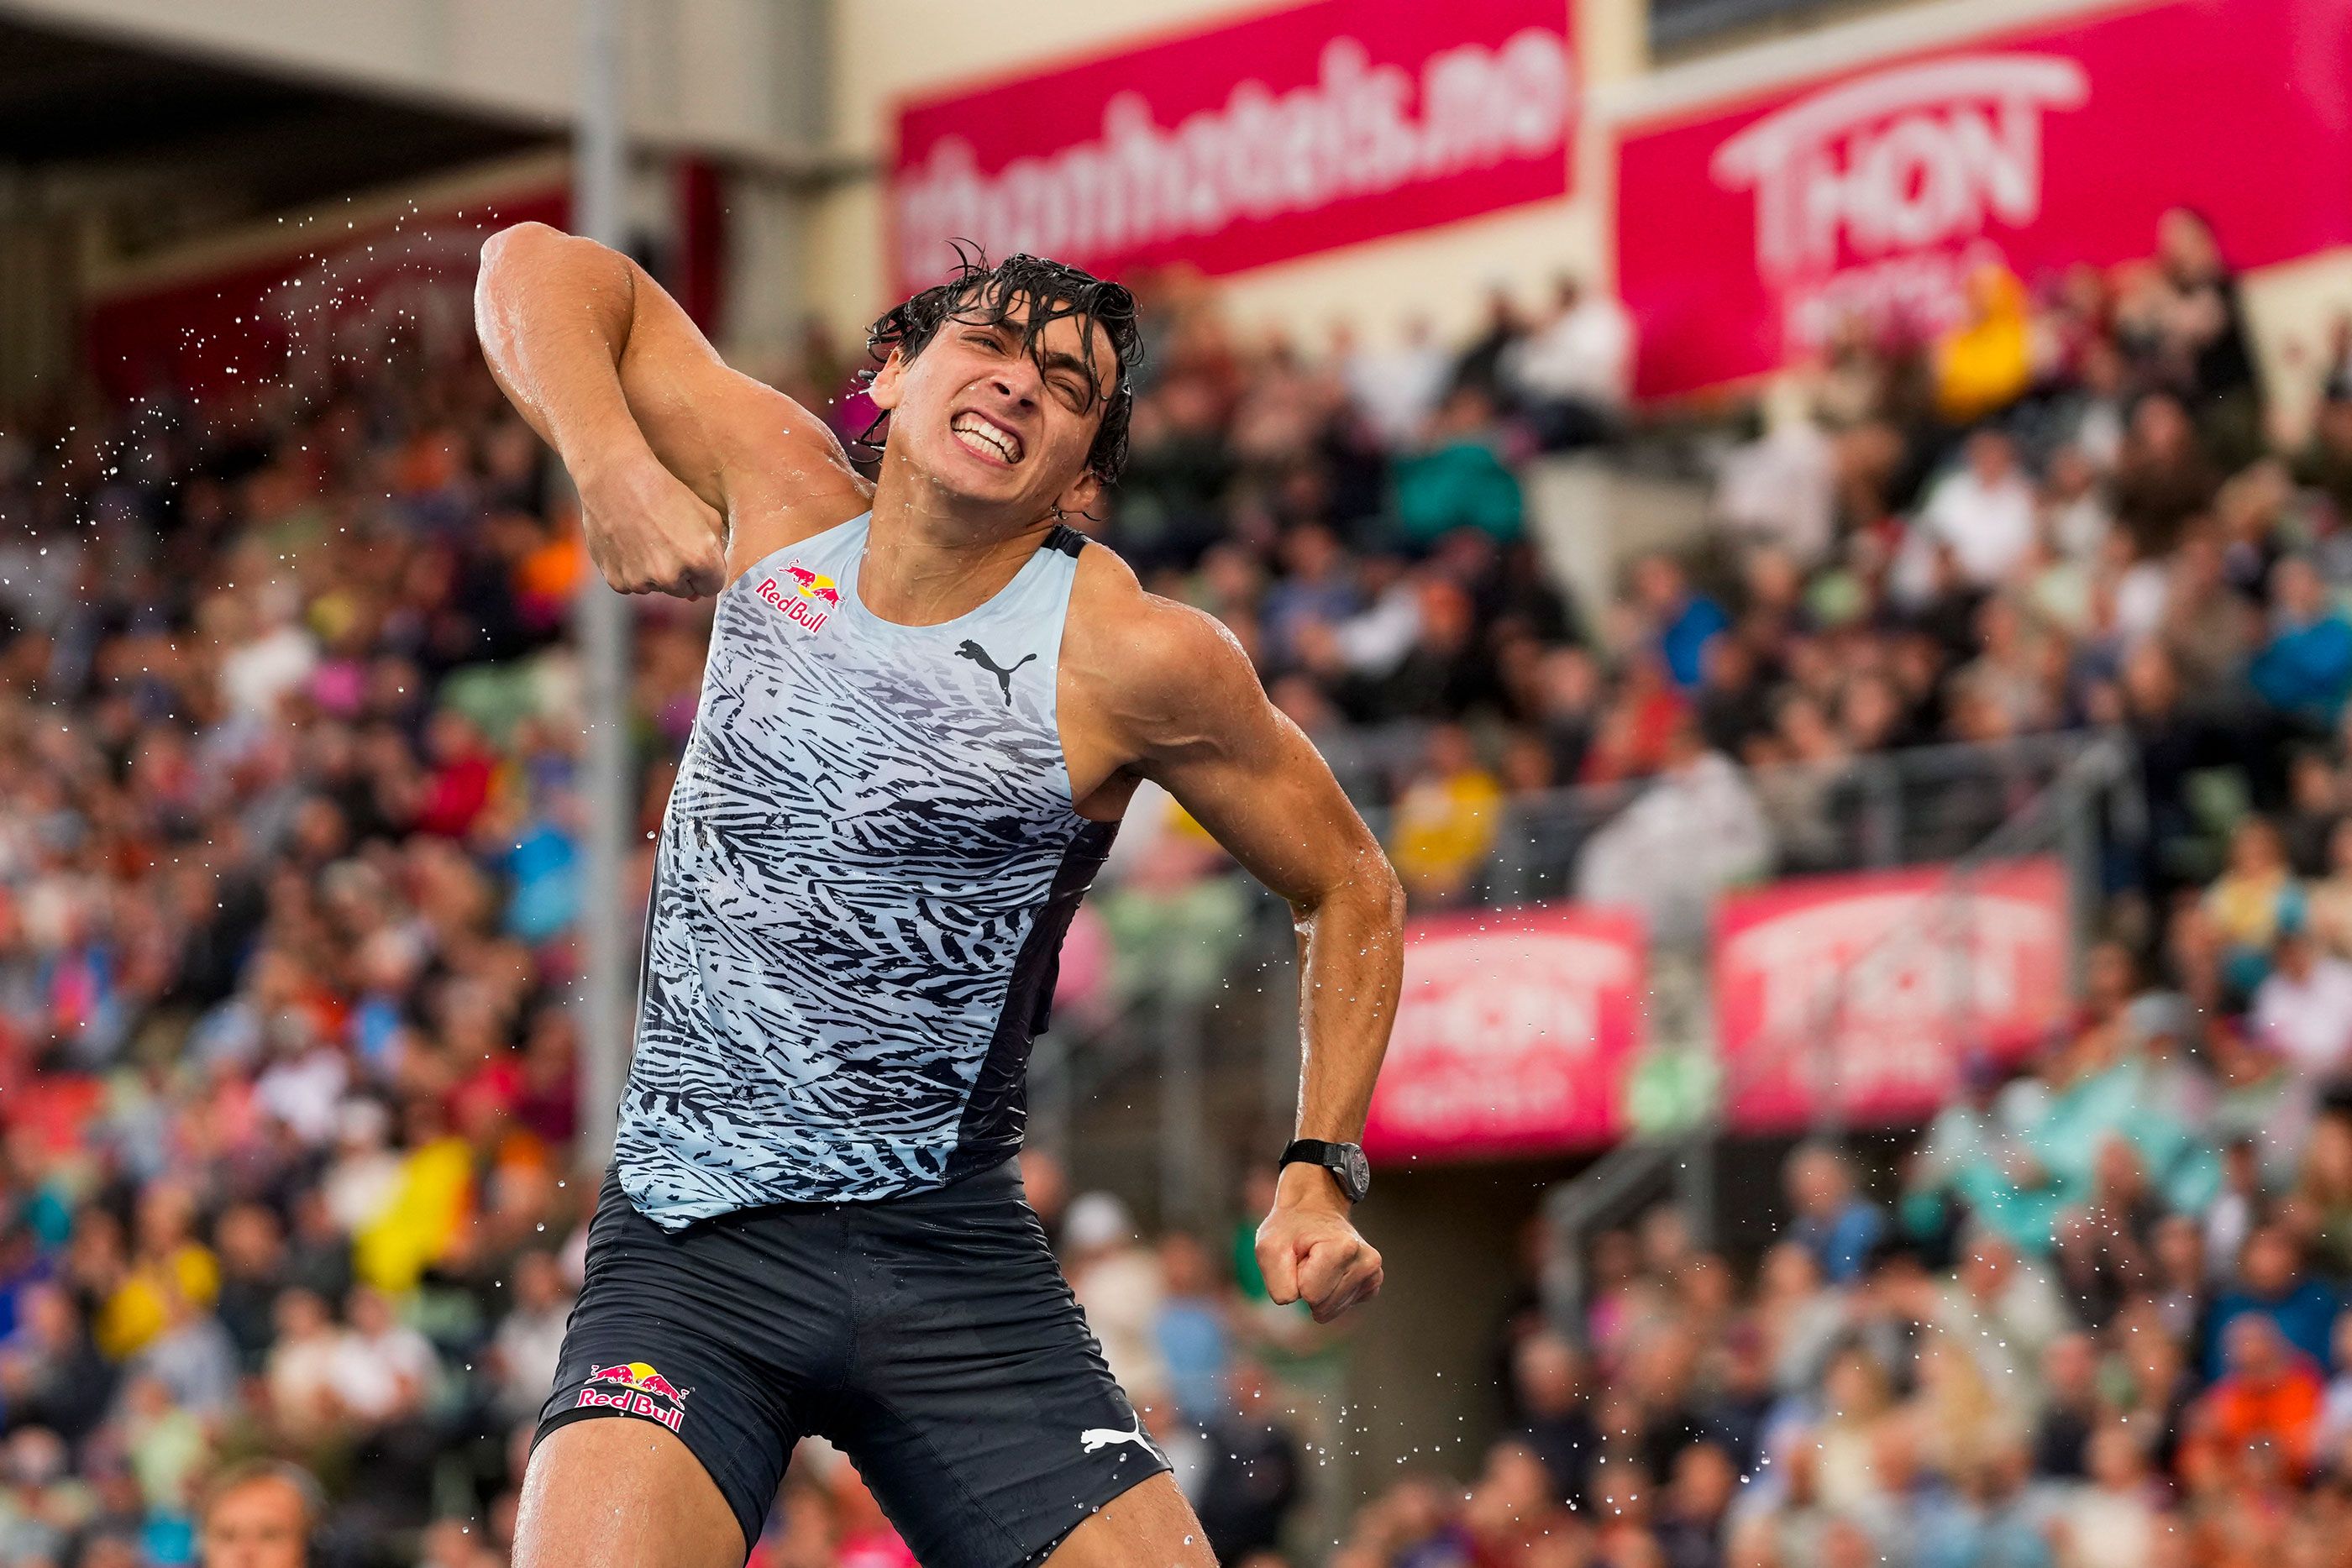 Mondo Duplantis celebrates his world lead and meeting record in the pole vault at the Wanda Diamond League in Oslo